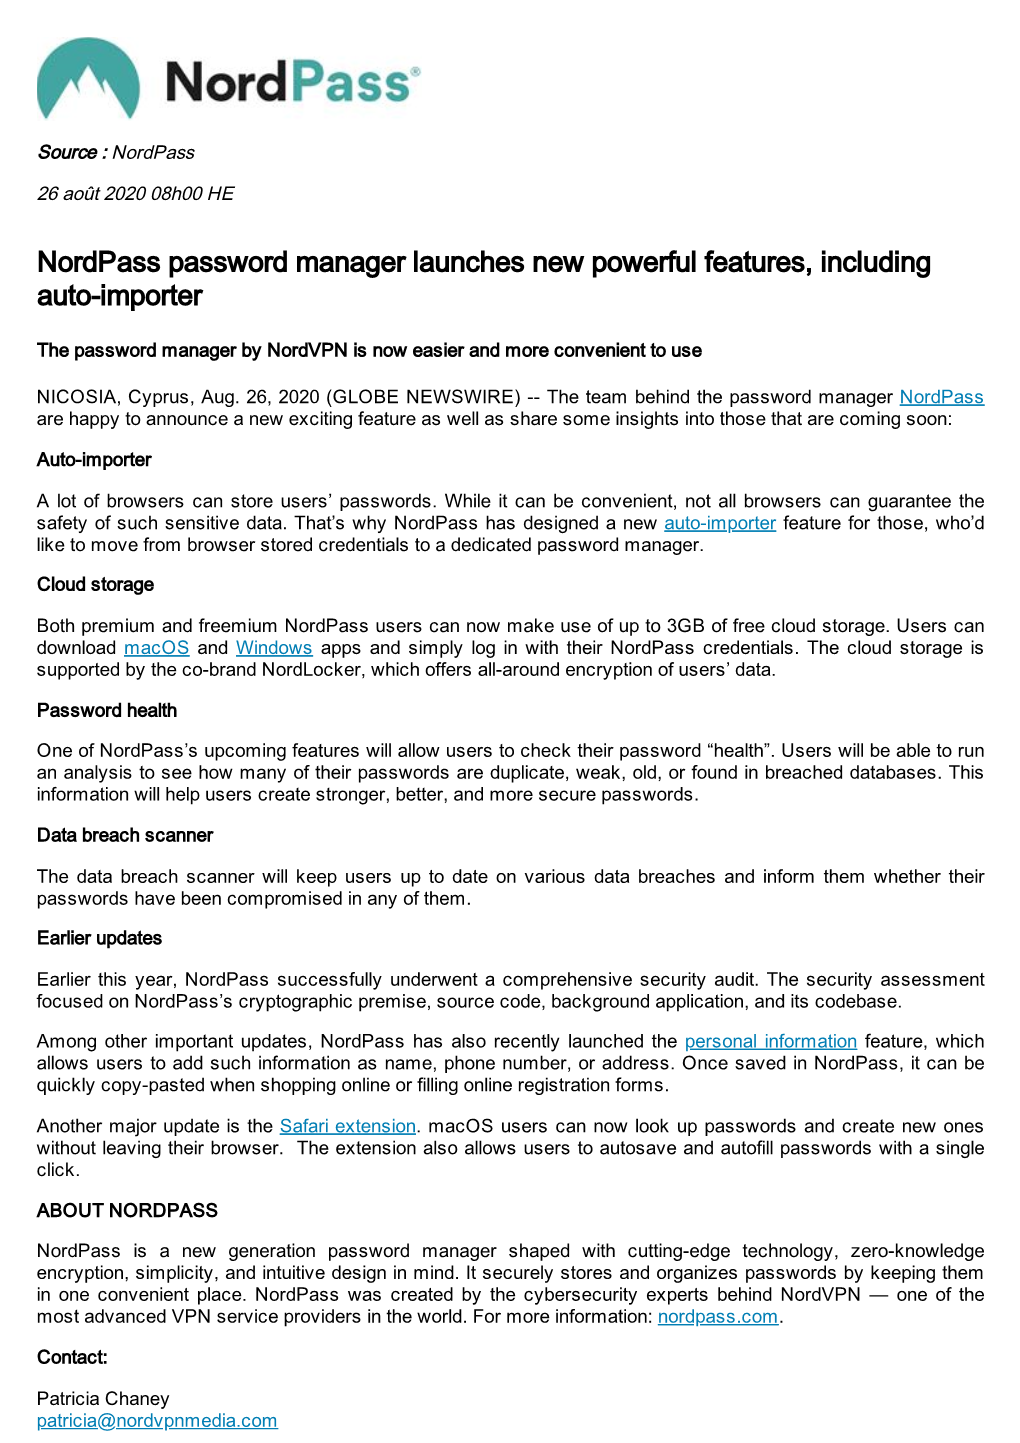 Nordpass Password Manager Launches New Powerful Features, Including Auto-Importer